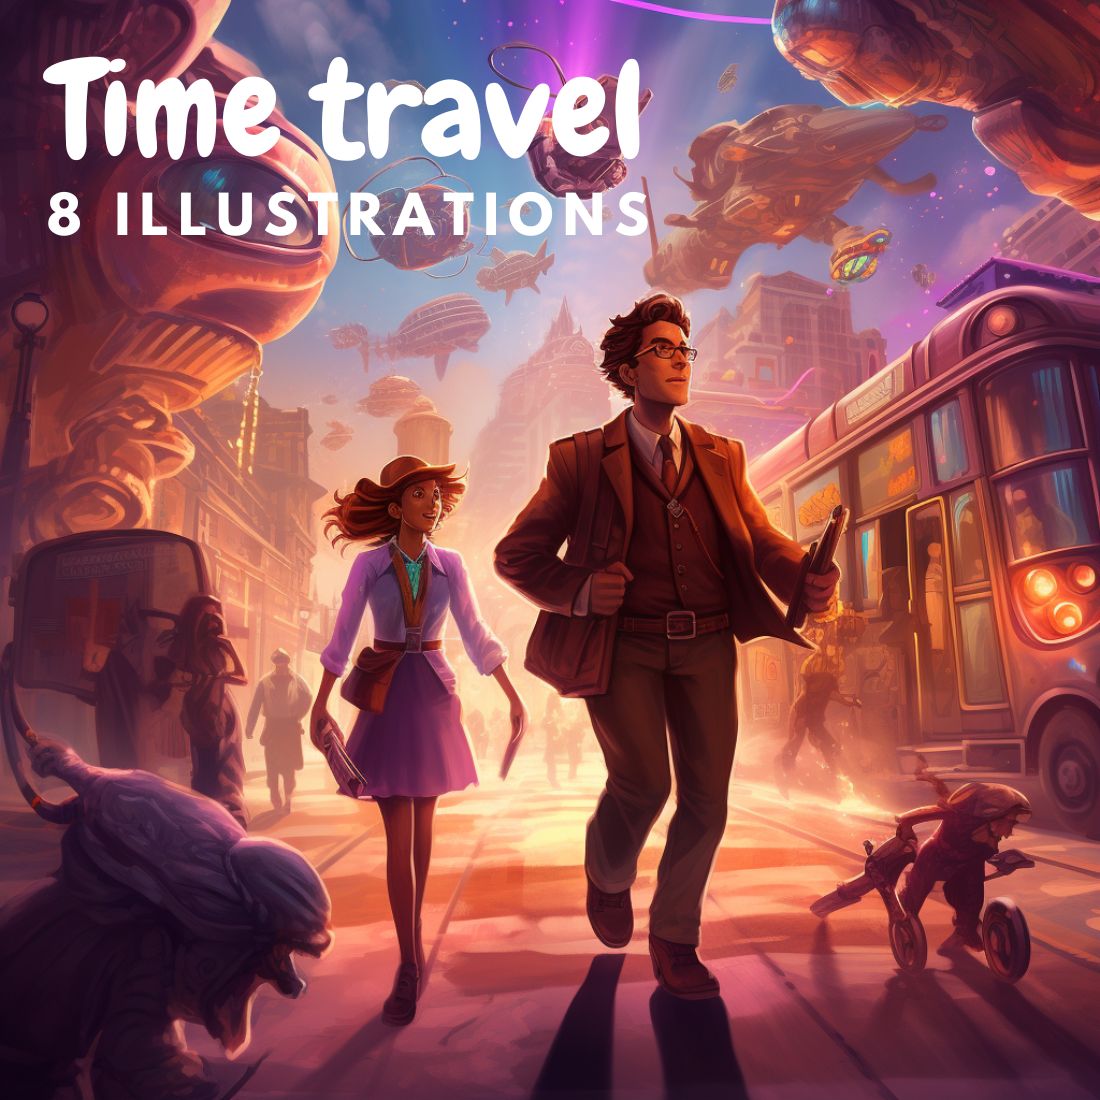 Time travel illustrations cover image.